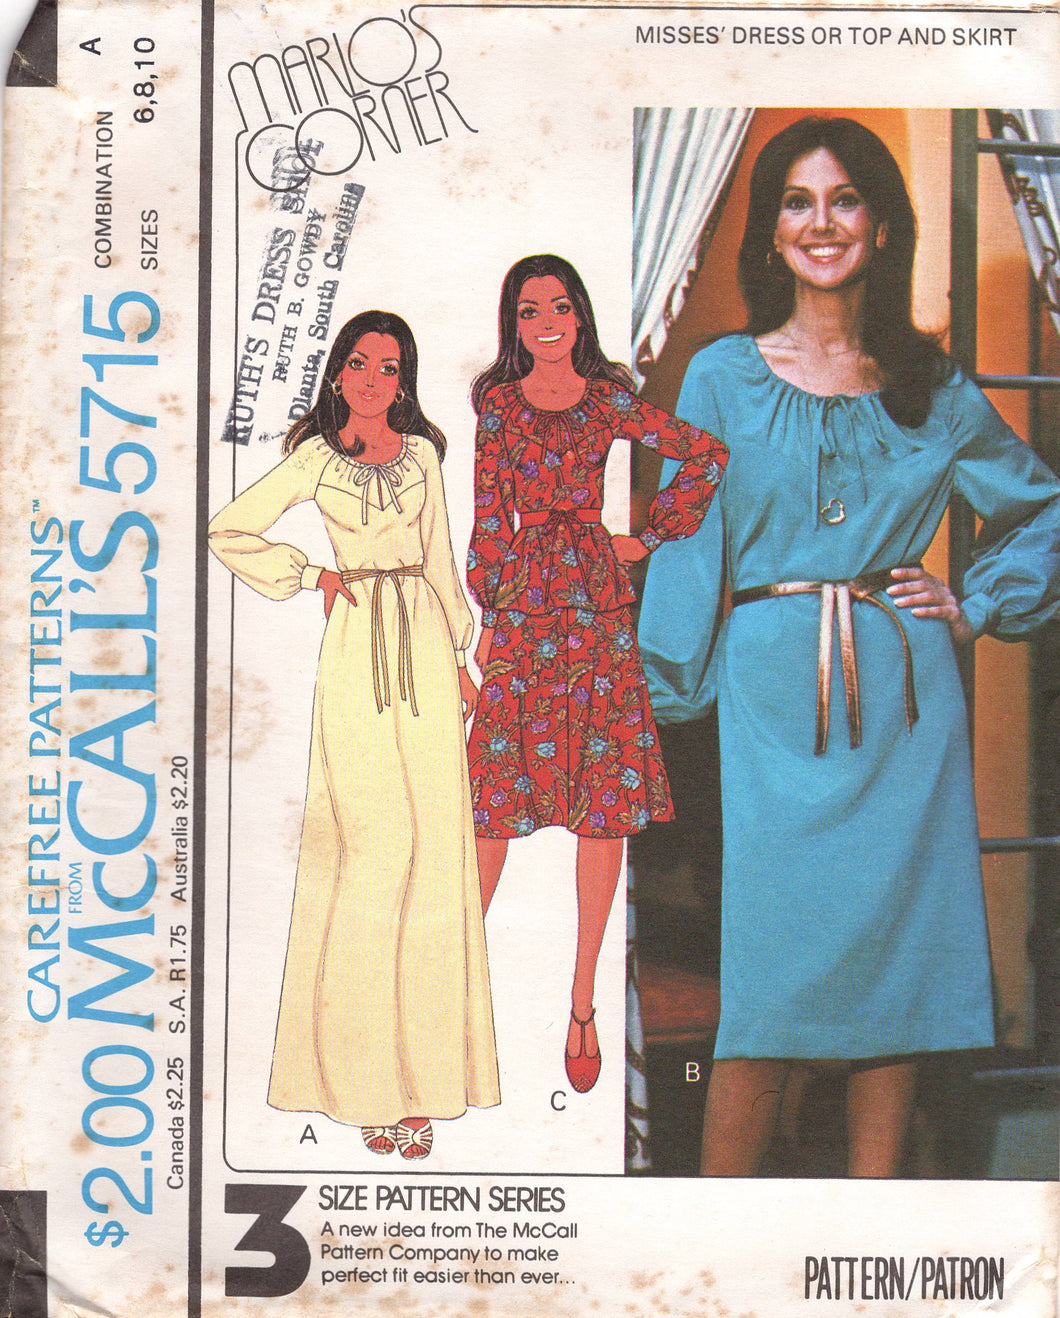 1970's McCall's Maxi Scoop Neck Dress with Yoke Accent or Tunic and Flared Skirt Pattern - Bust 30.5-42